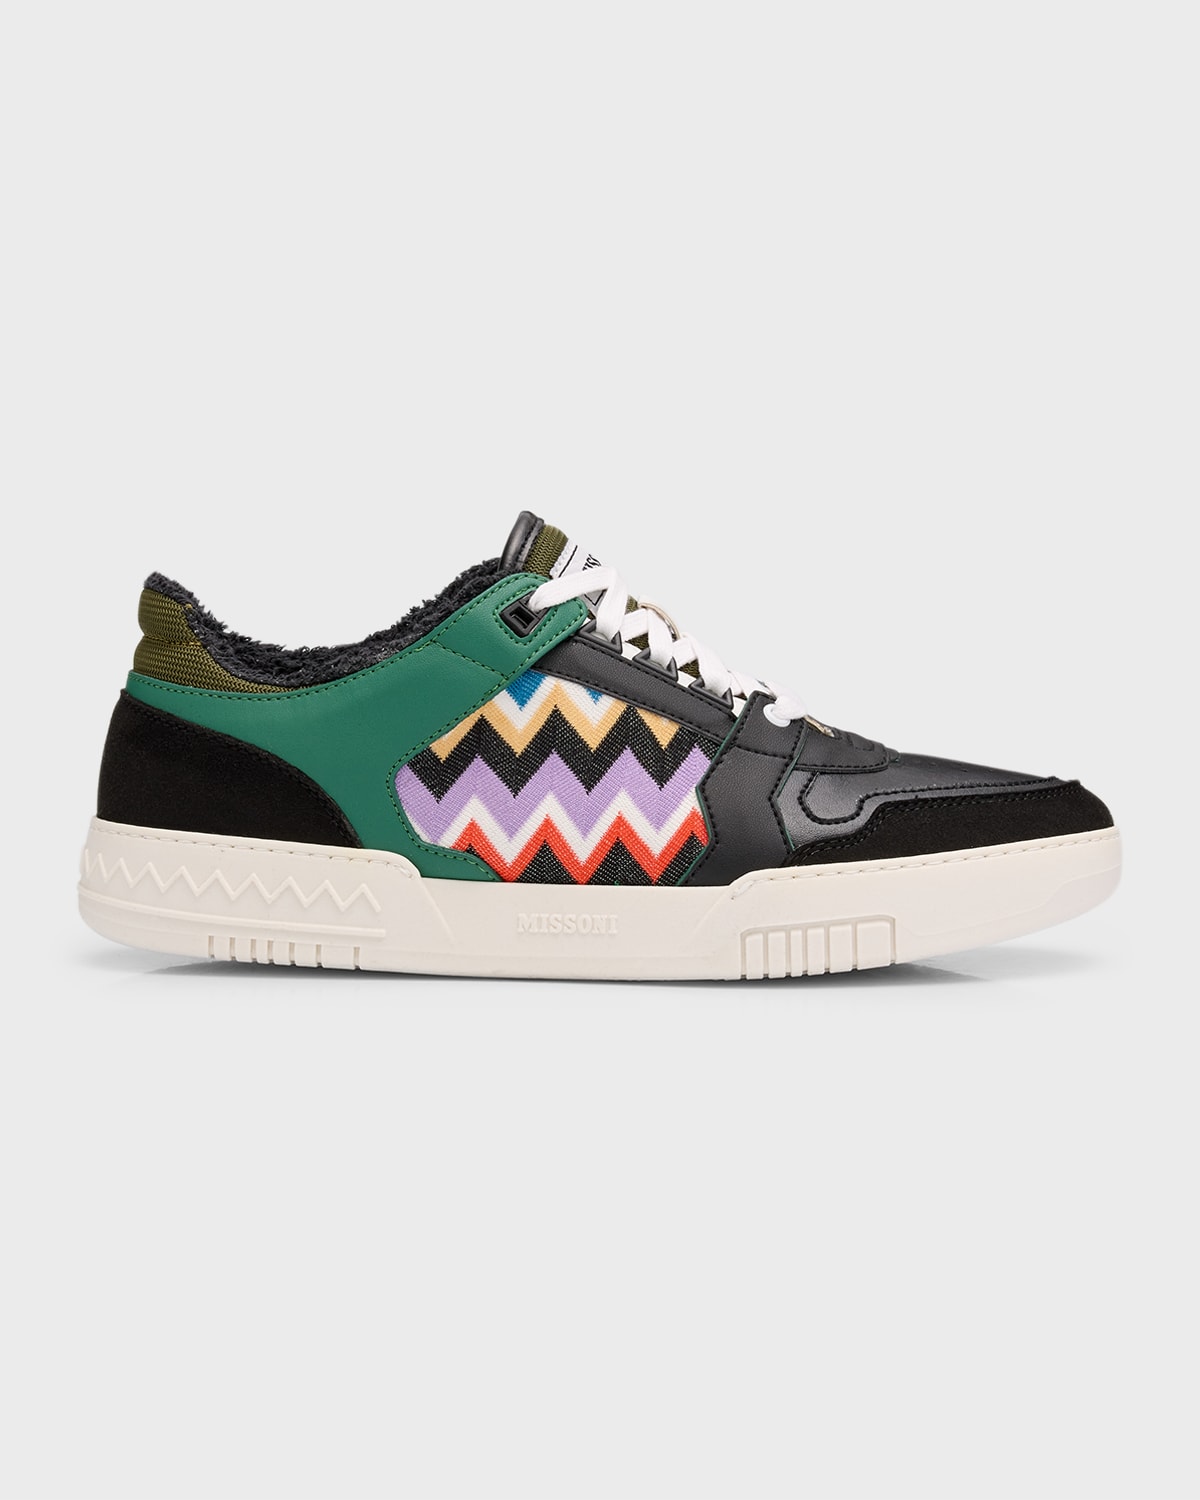 Missoni Men's Basket Leather And Textile Low-top Sneakers In Black/green